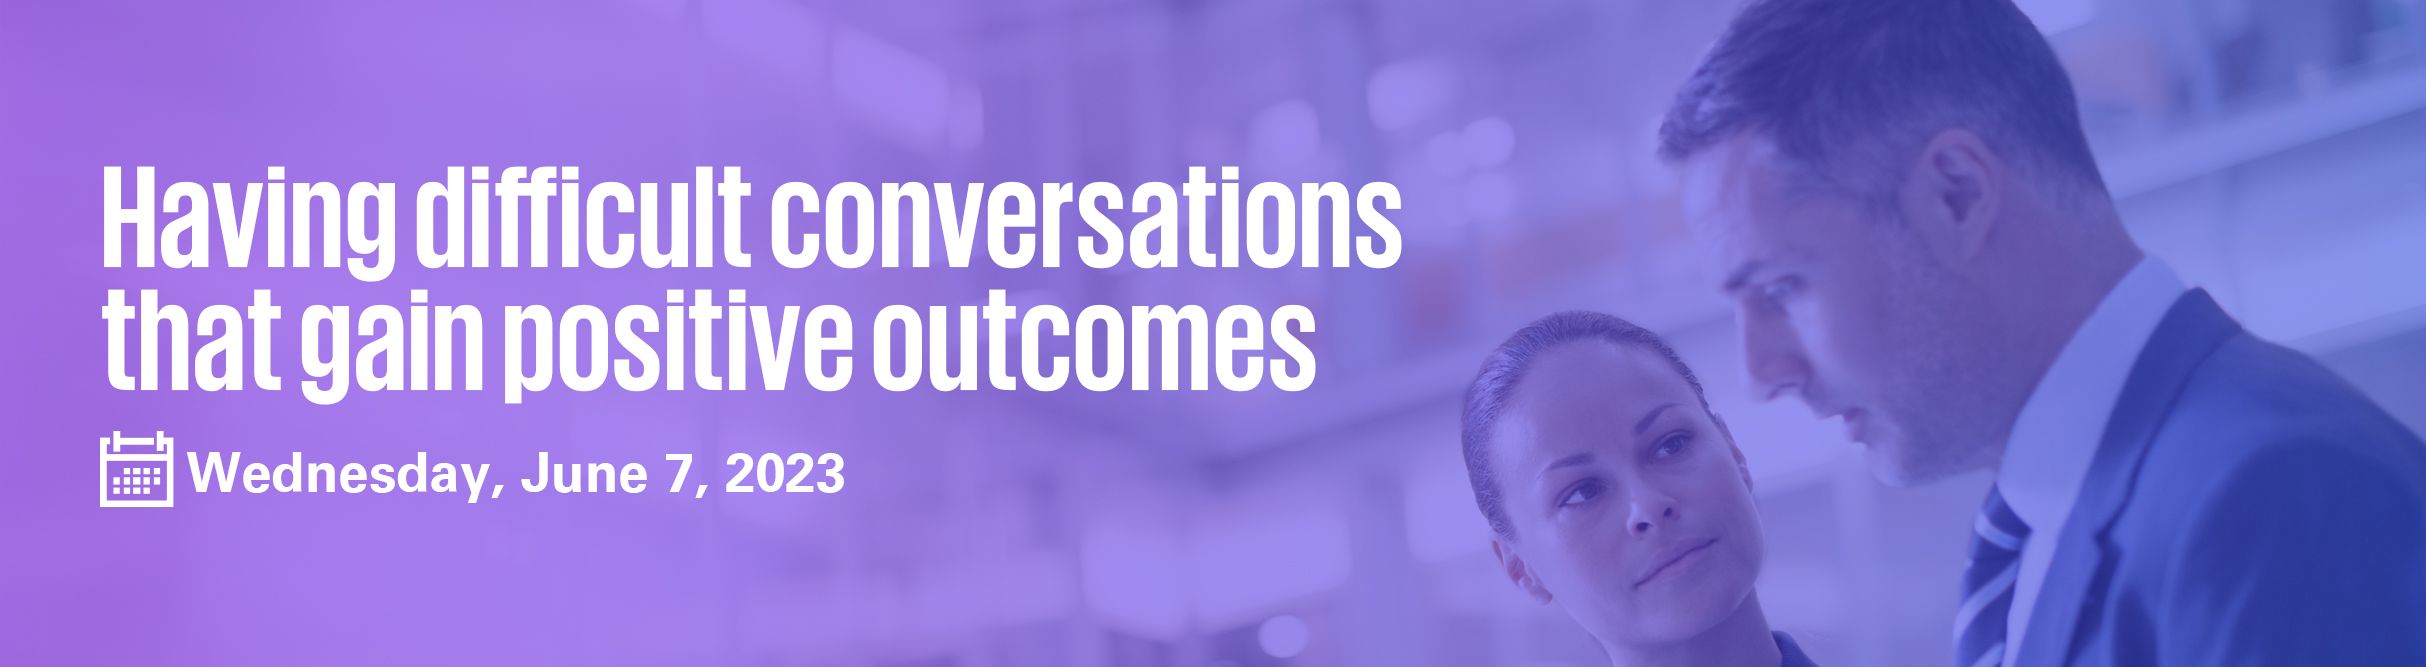 Having difficult conversations that gain positive outcomes